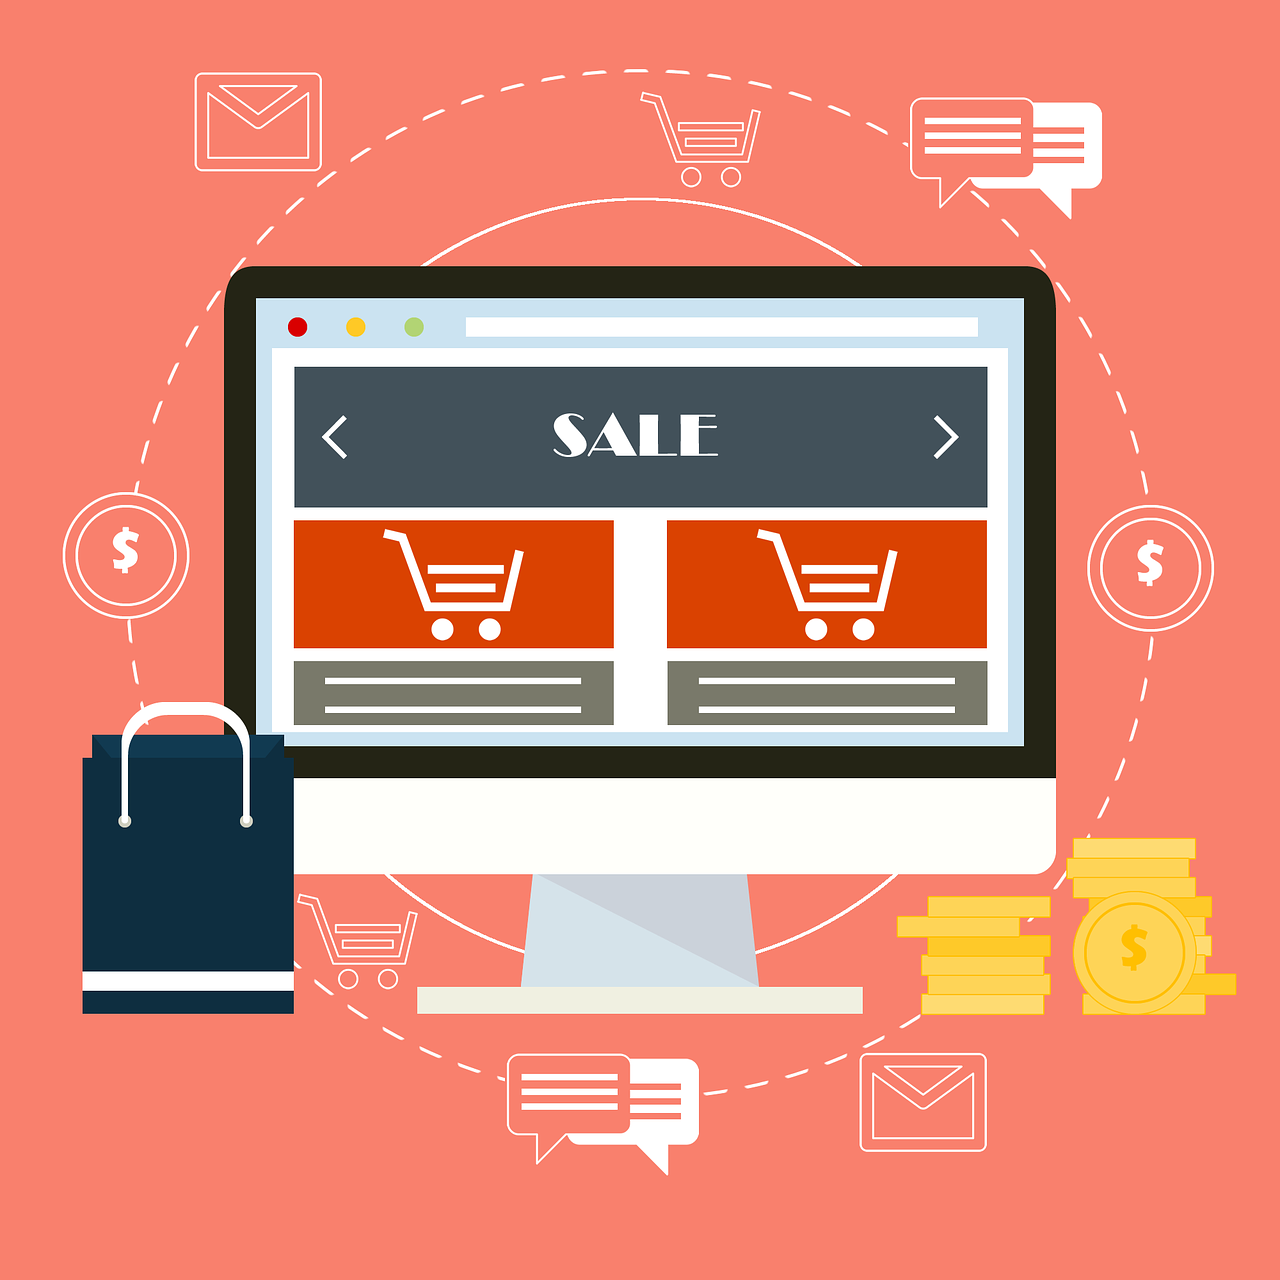 Difference Between B2B ECommerce and B2C Ecommerce